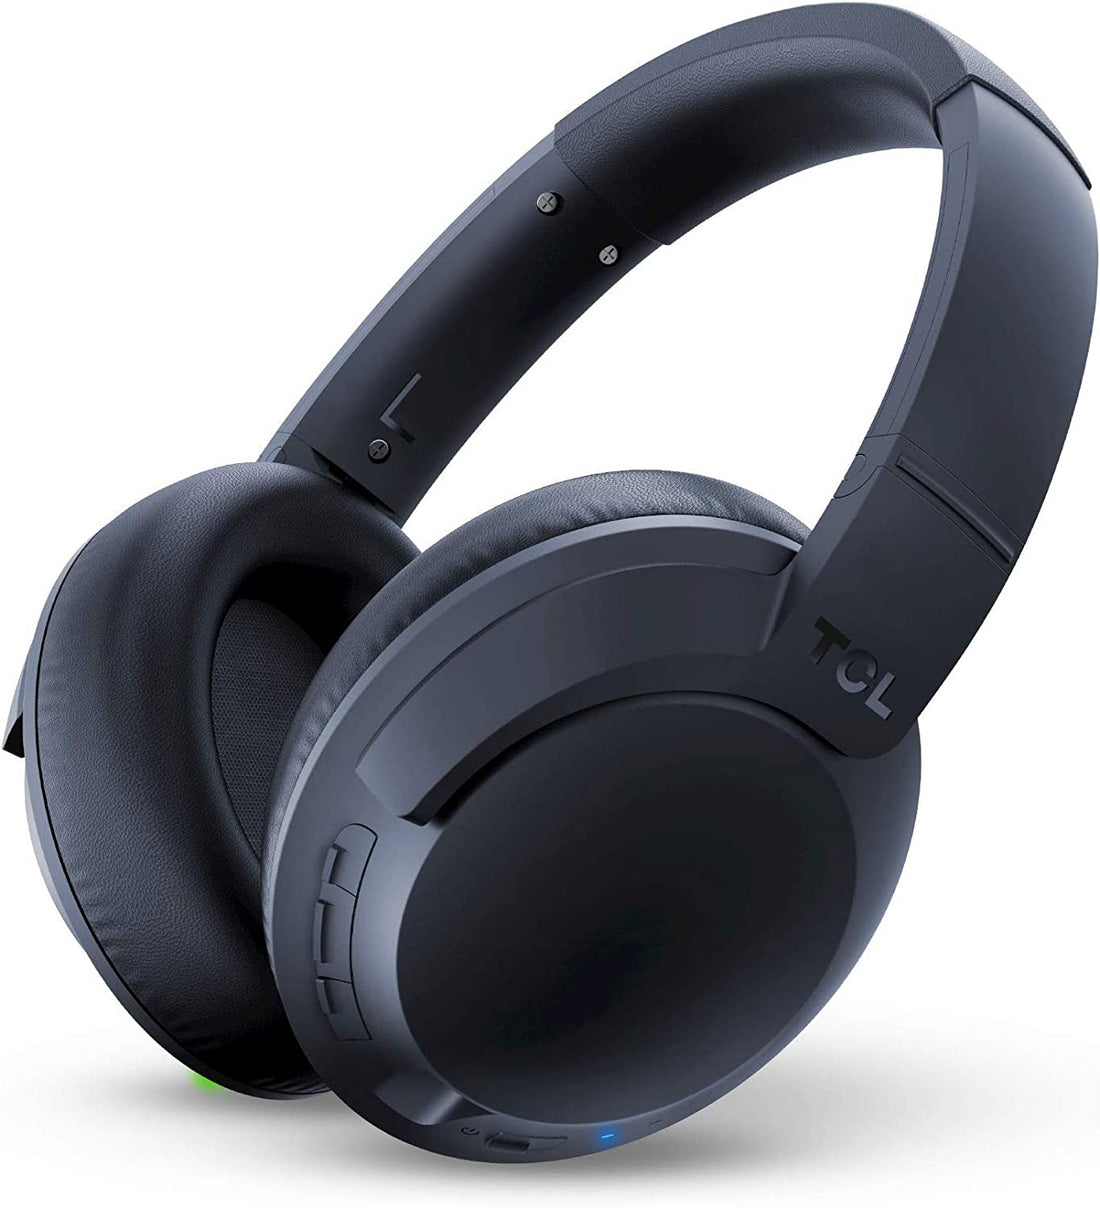 TCL ELIT400 Wireless On-Ear Hi-Res Noise Cancelling Bluetooth Headphones - Black (Refurbished)